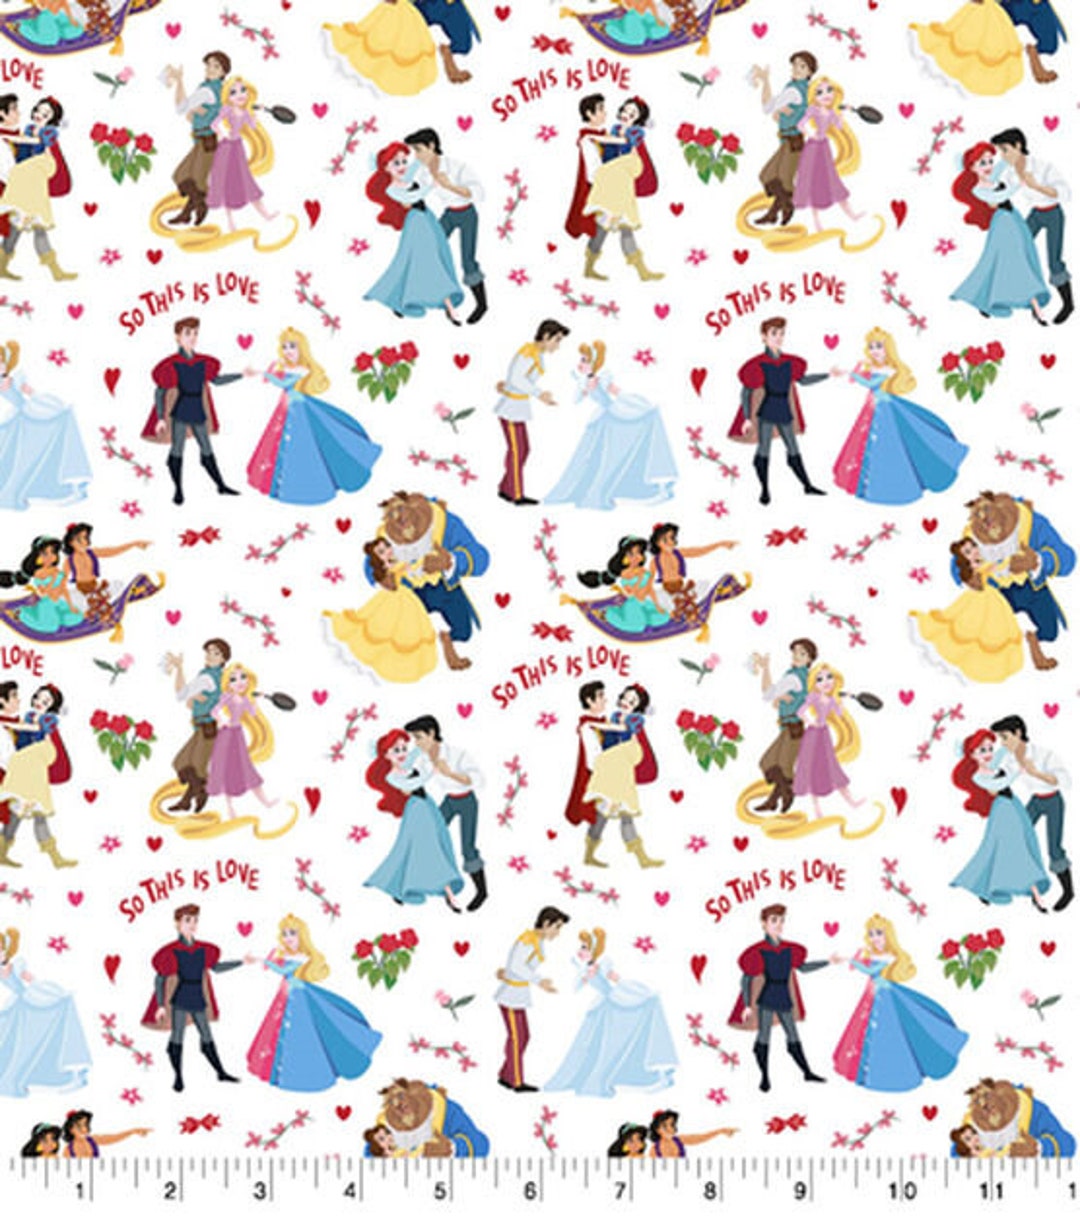 Disney Princess This is Love Fabric 100% Cotton 1/2 Yd, Fat Quarters ...